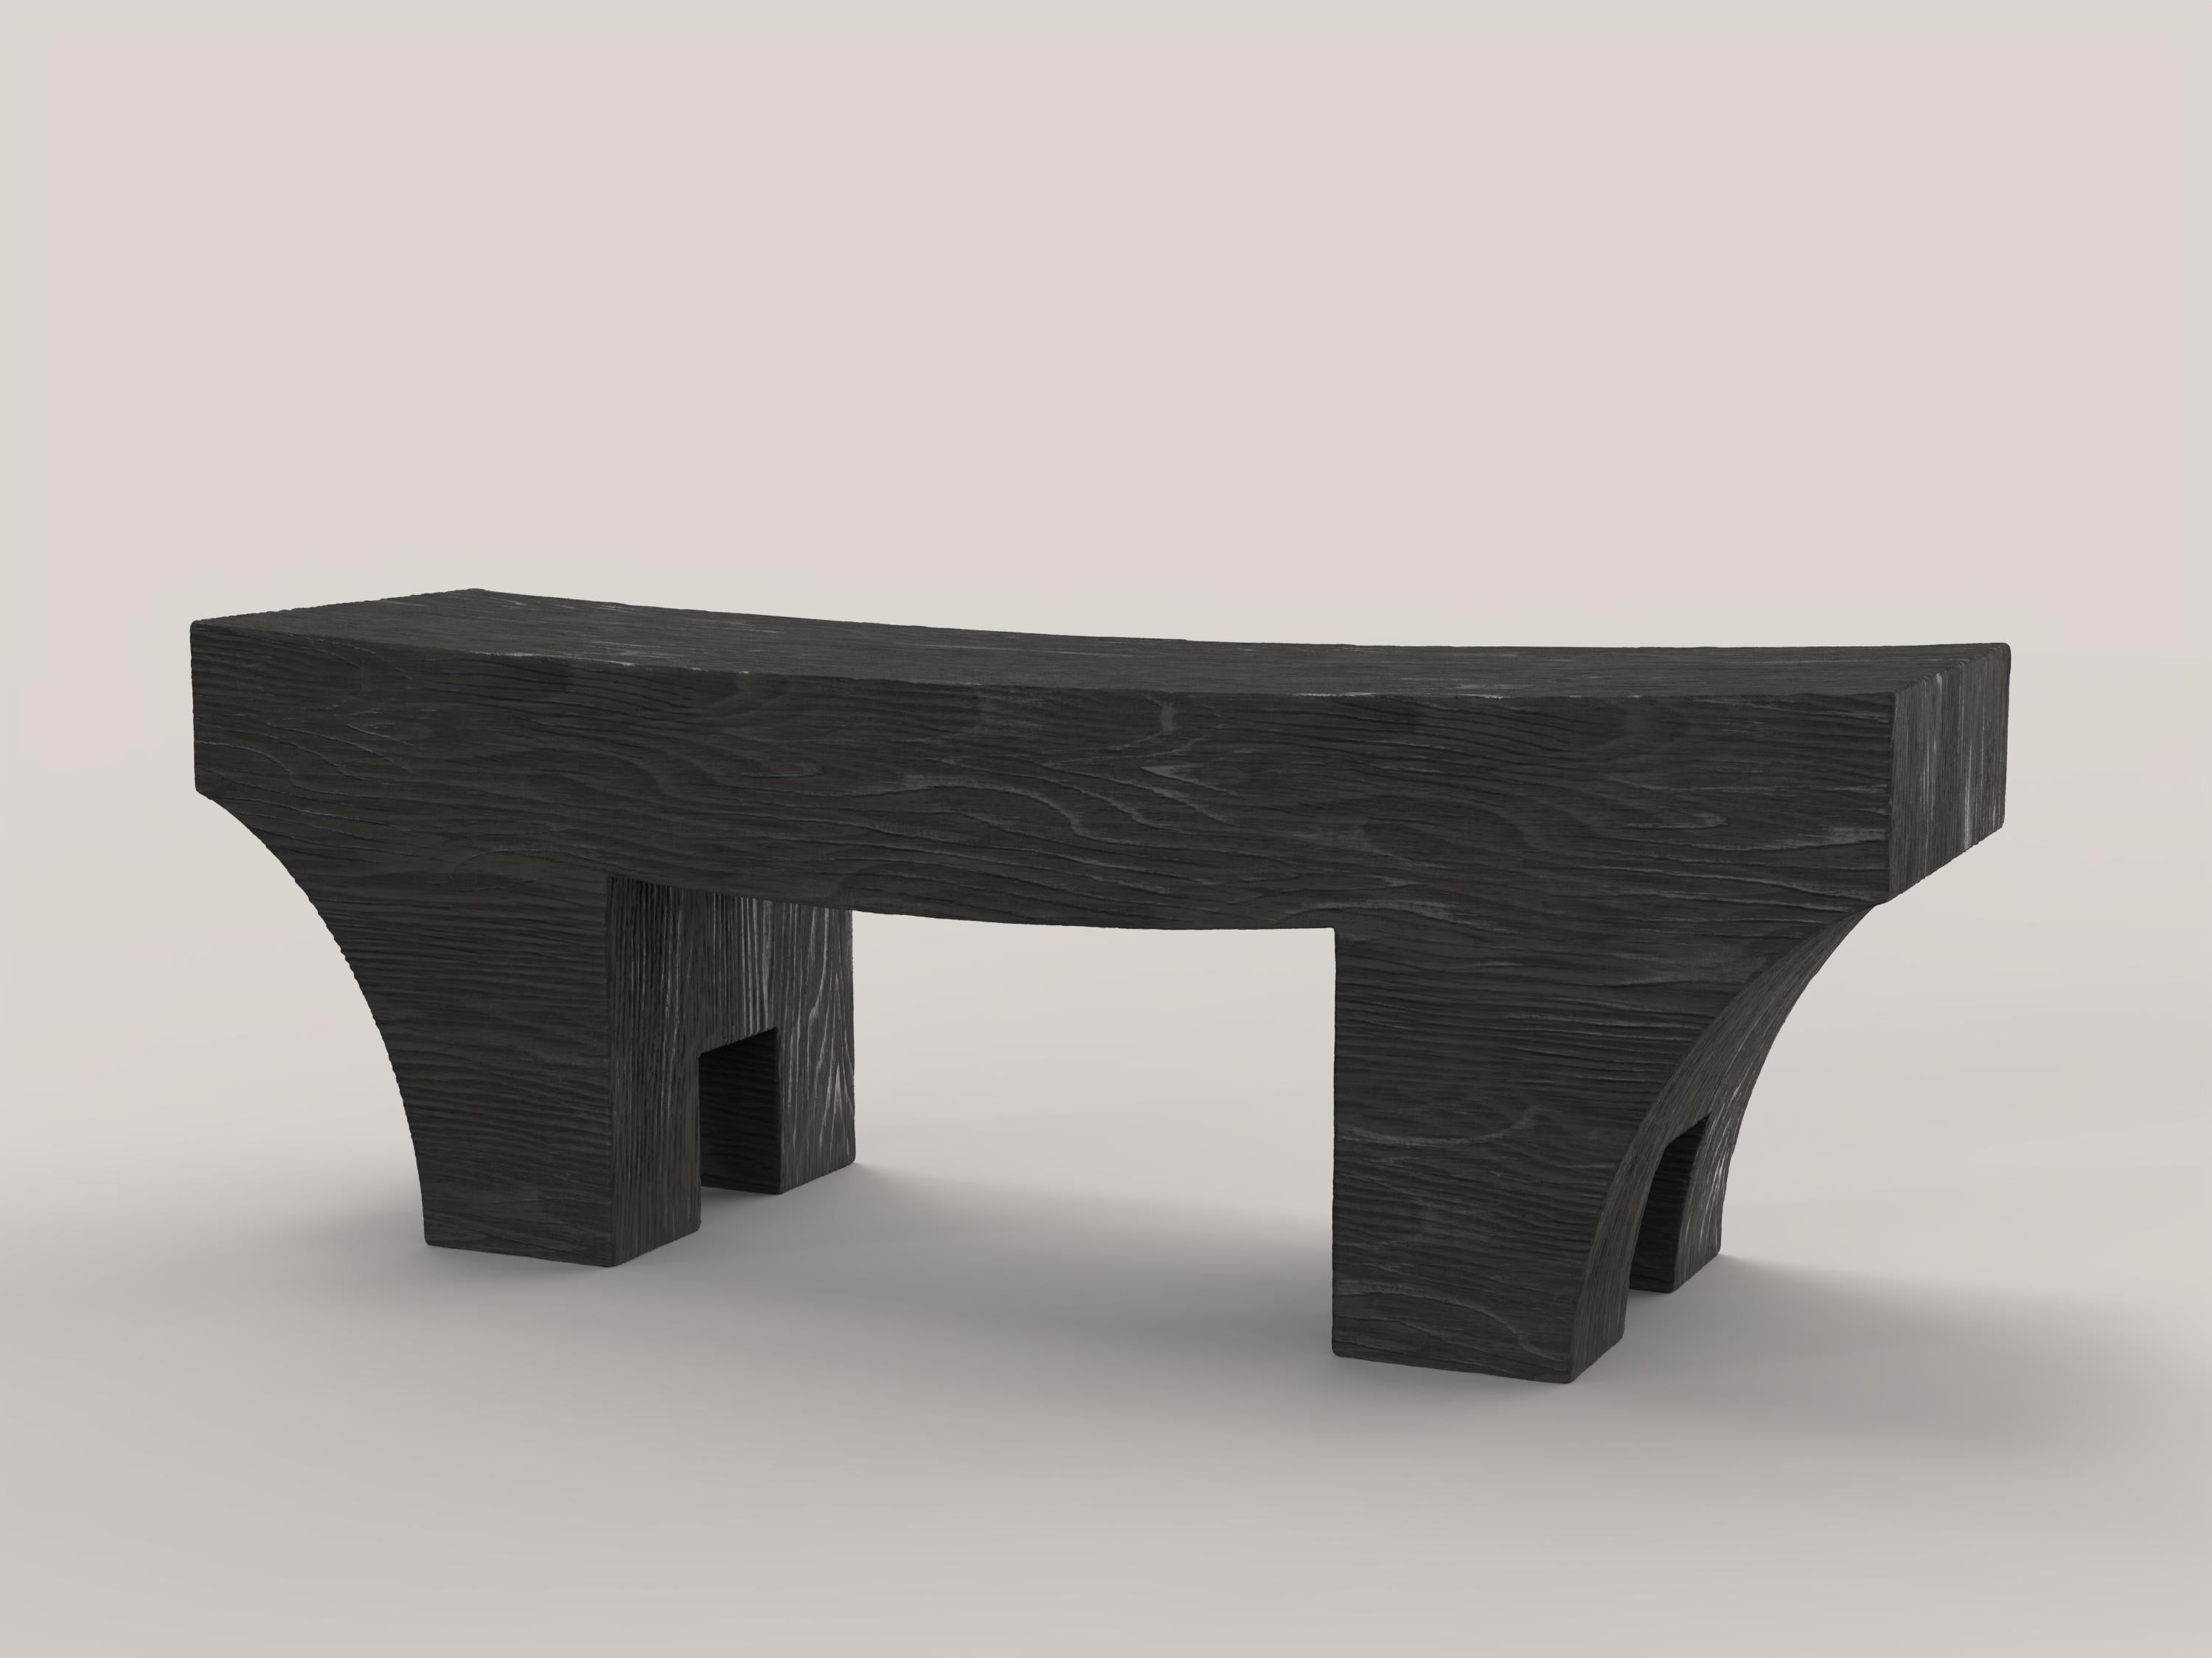 Mhono V2 Bench by Edizione Limitata
Limited edition of 150 pieces. Signed and numbered.
Dimensions: D 120 x W 35 x H 43 cm.
Materials: Charred solid wood.

This contemporary collection is a product of Italian craftmanship, starting entirely from